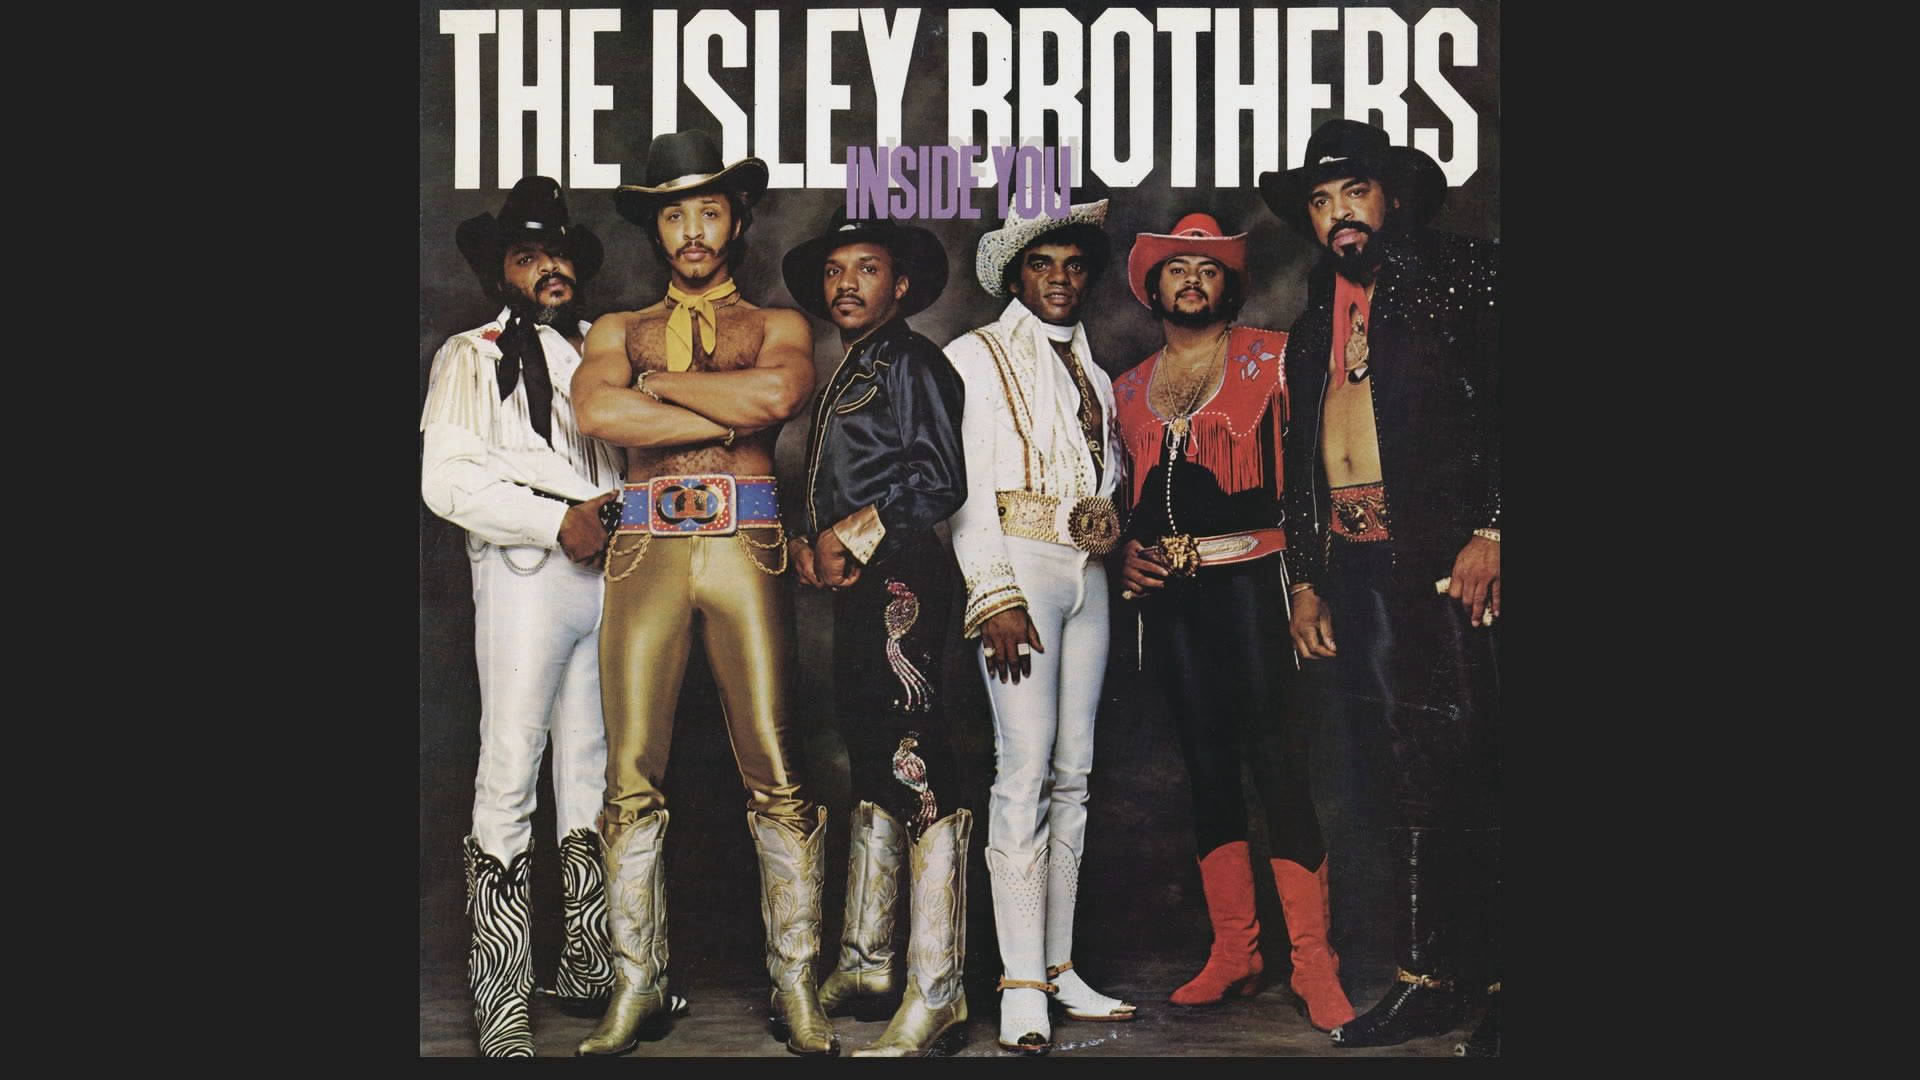 The Isley Brothers Inside You Album Wallpaper